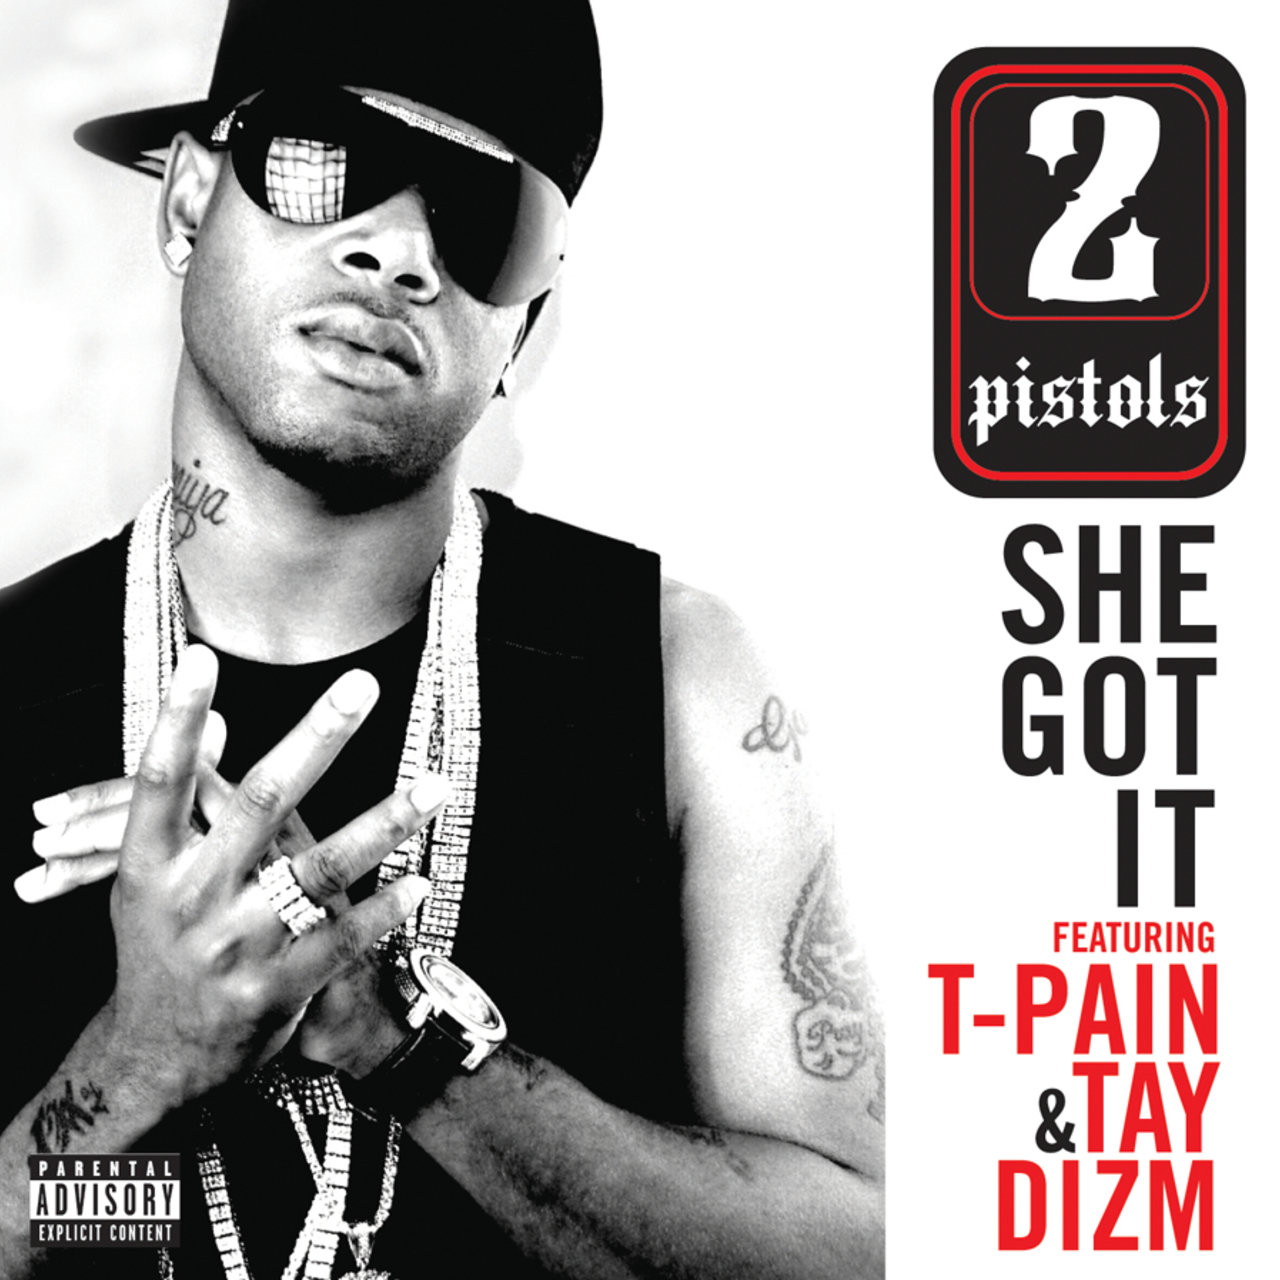 2 Pistols - She Got It (ft. T-Pain And Tay Dizm) (Cover)